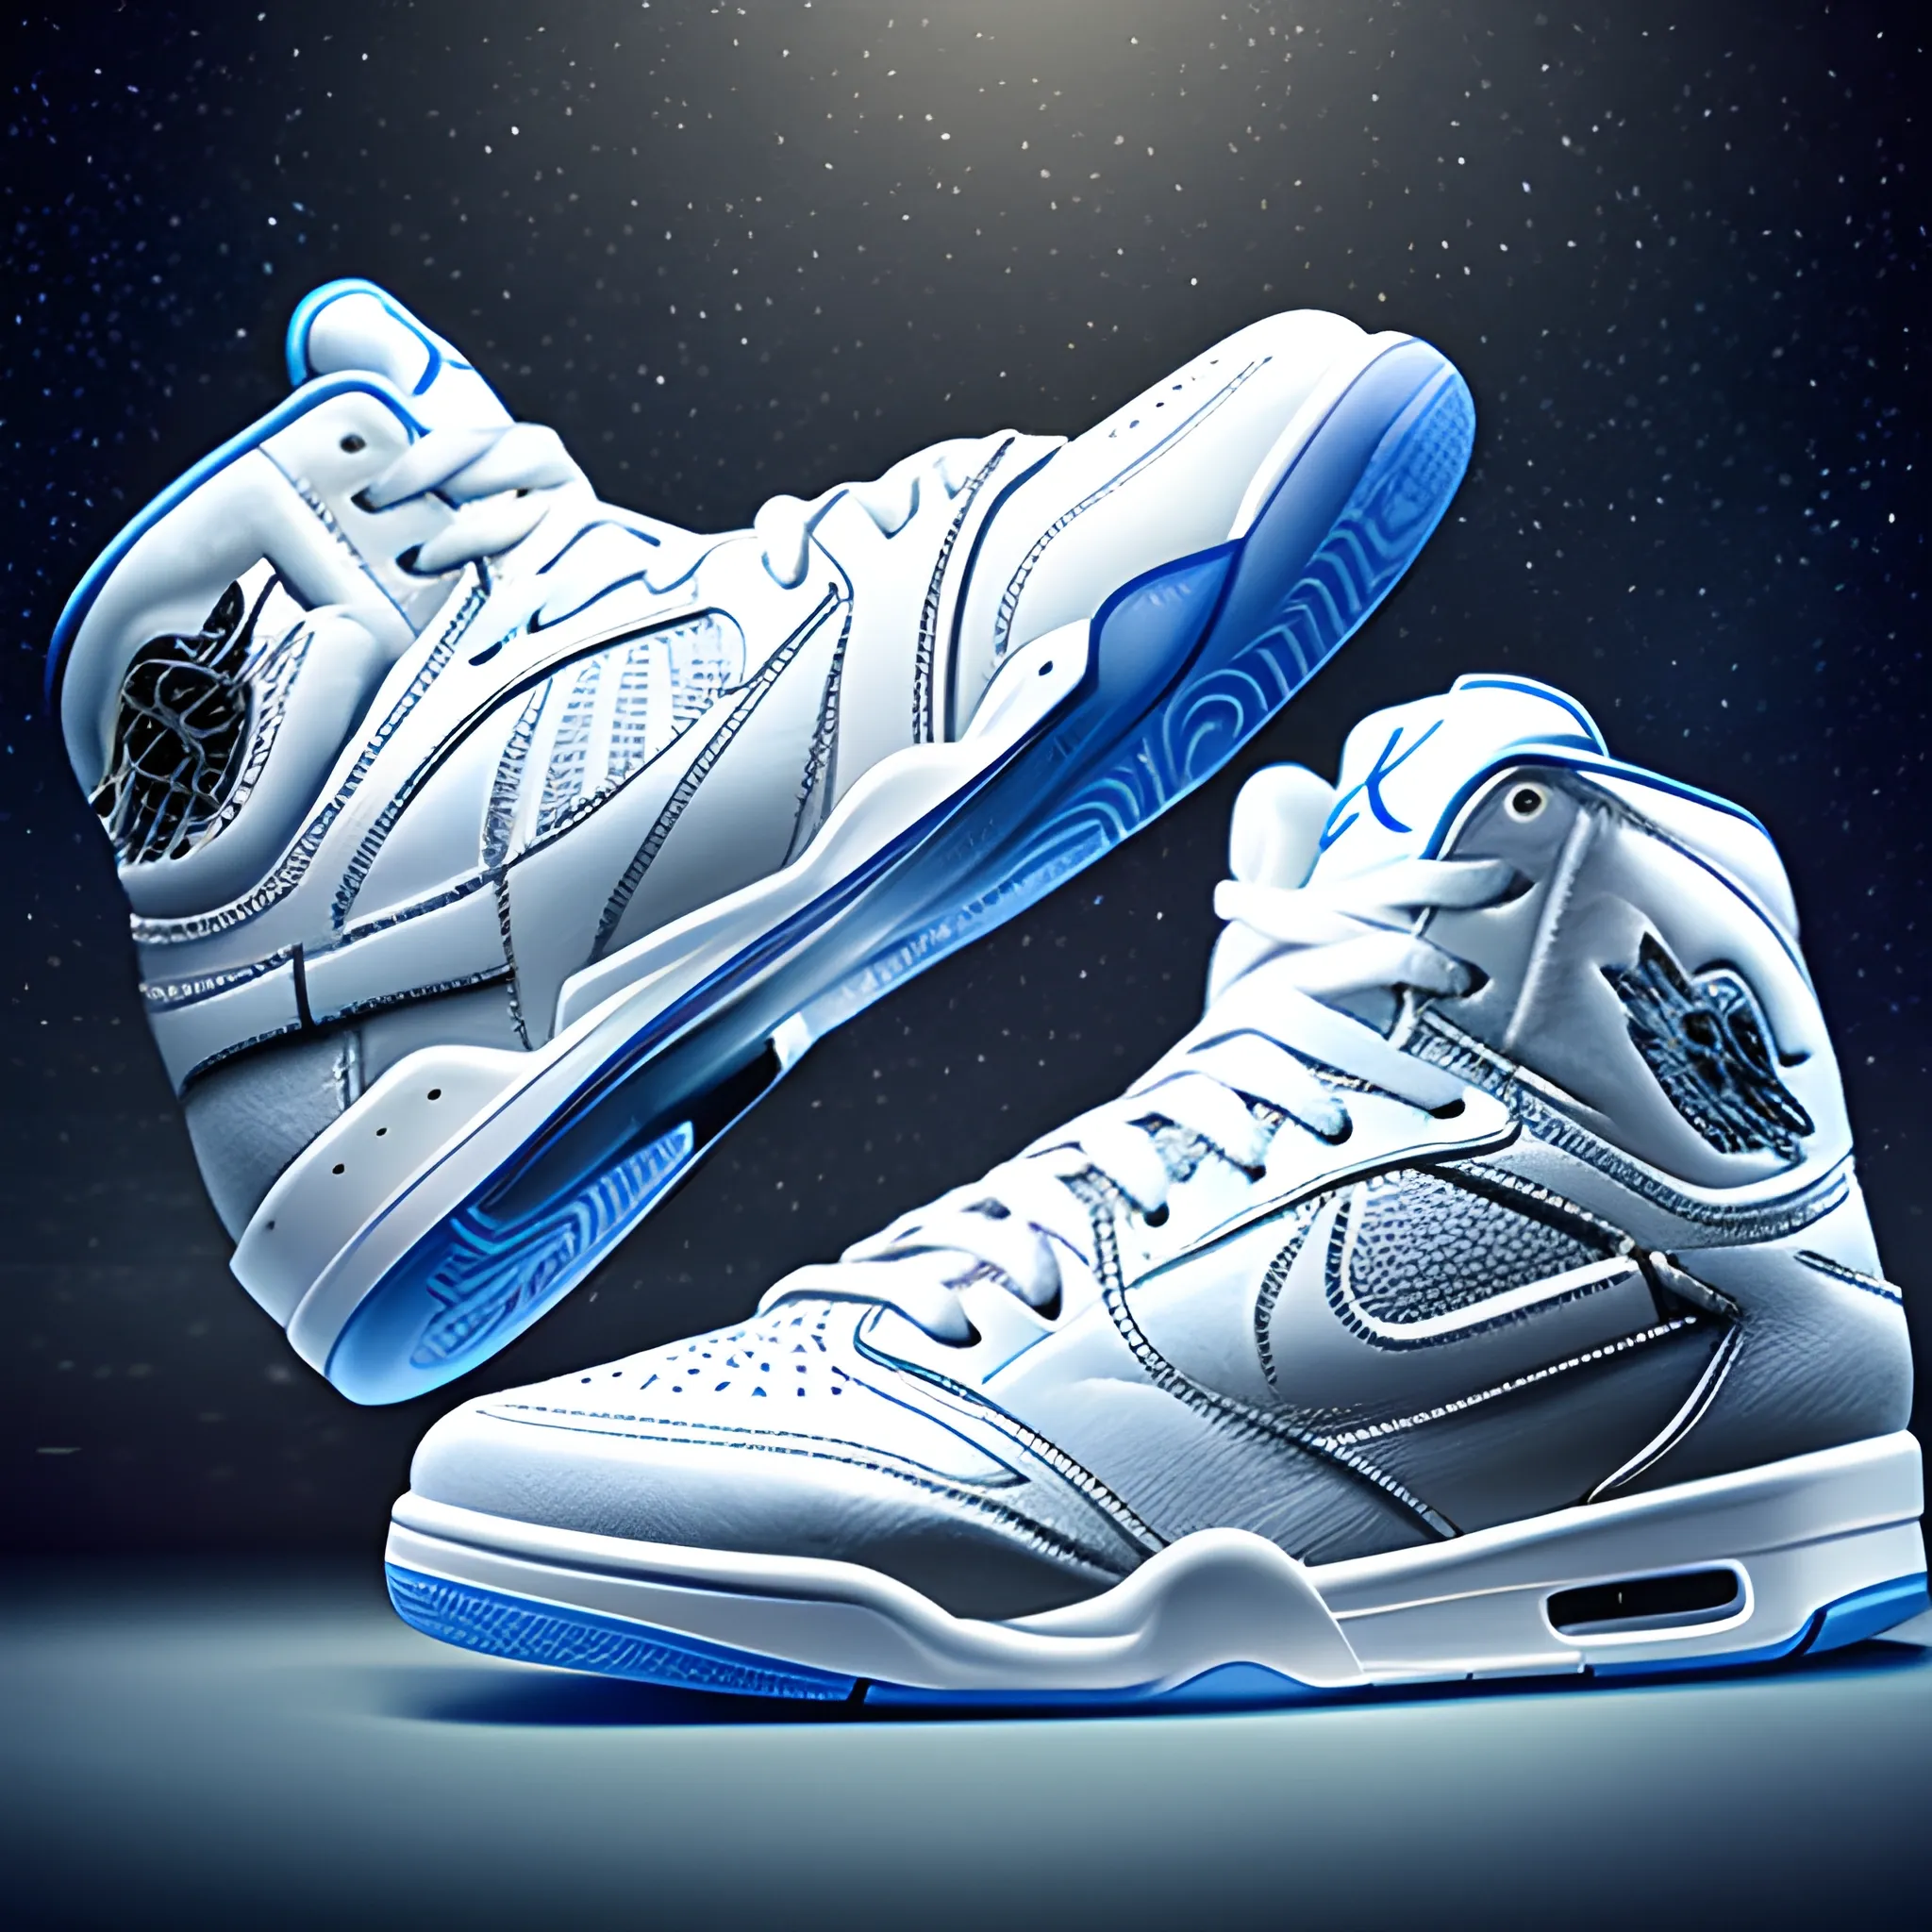 Surreal and heavy detailed basketball shoe product photo with spacesuit elements, air jordan style, light feel, full milky white design, pop in art station, smooth, whole shoe in picture, sharp focus